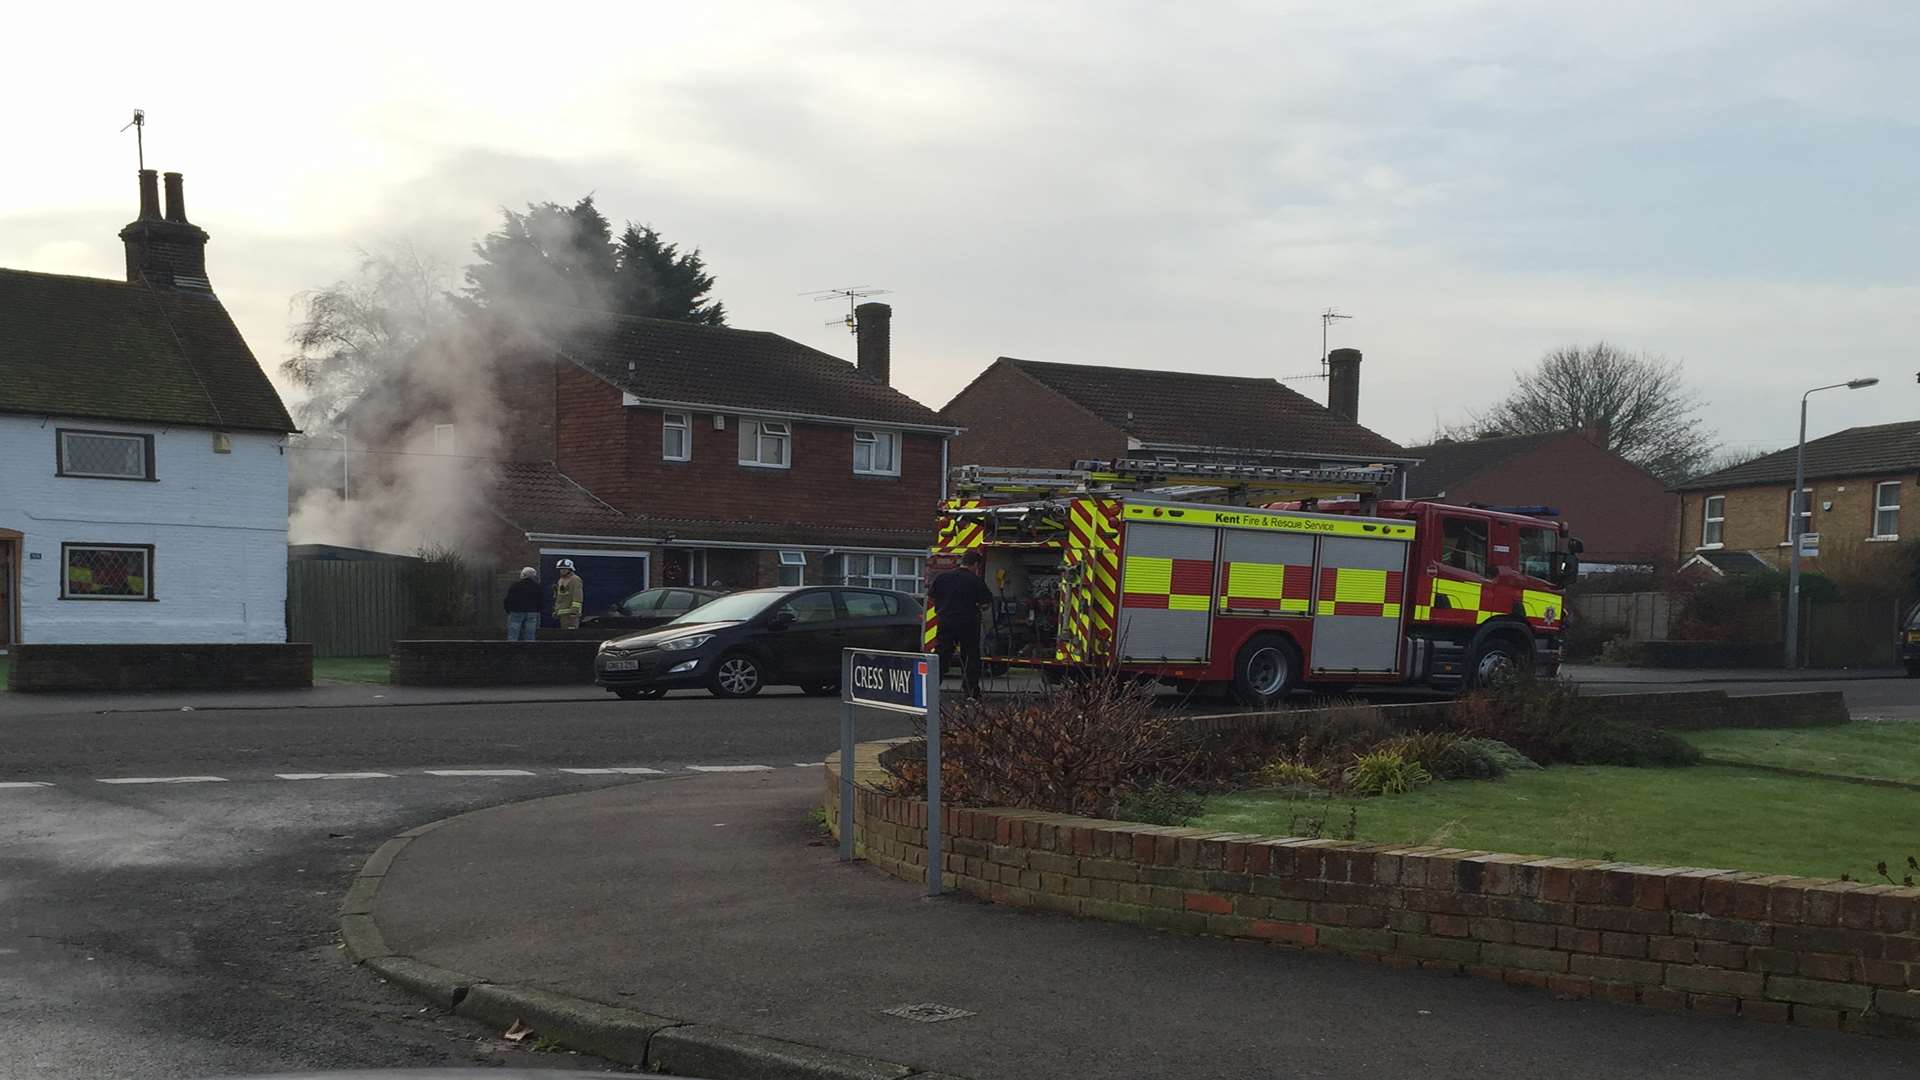 The fire in Faversham's Lower Road